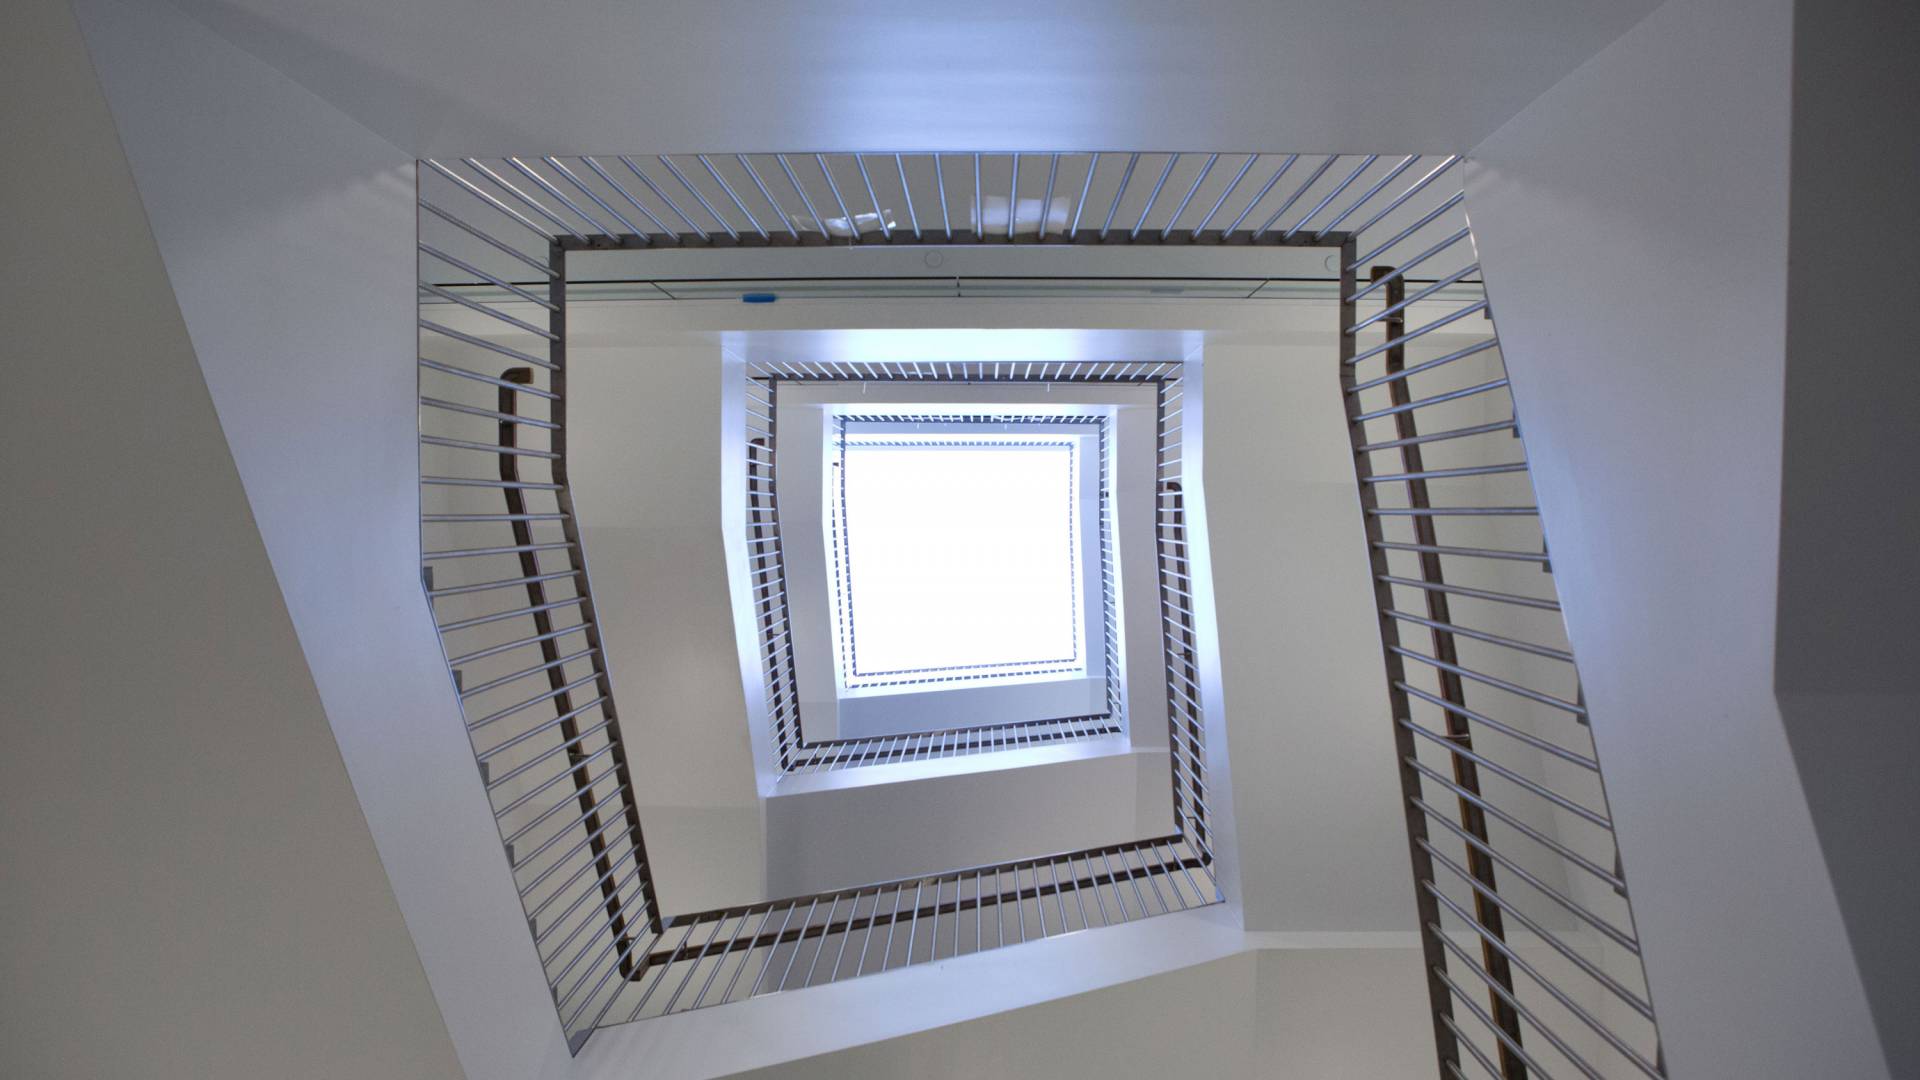 Looking up at a skylight surrounded by a staircase